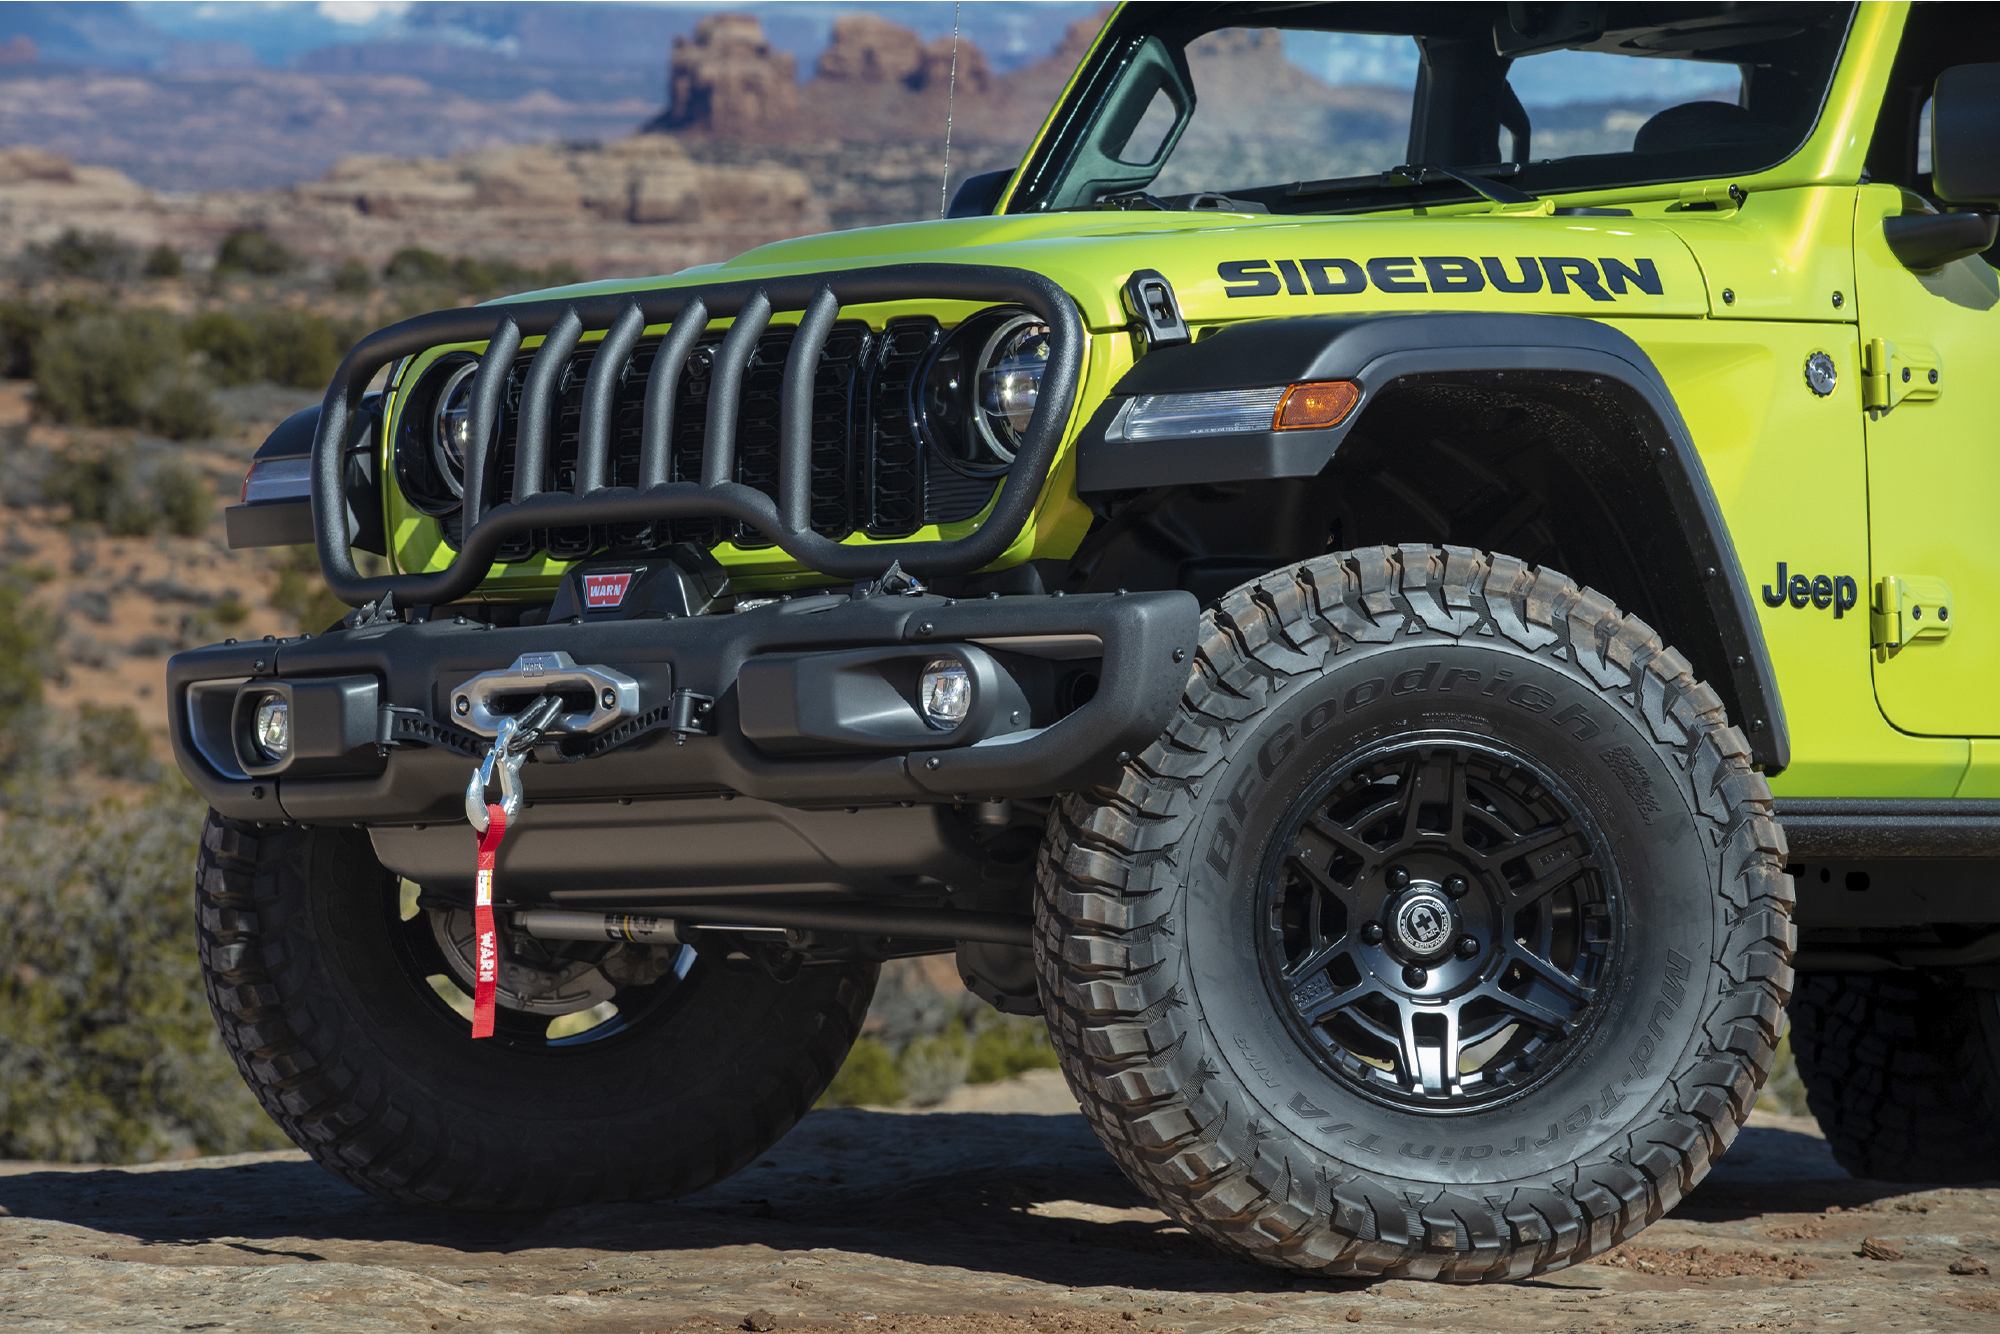 Jeep Gladiator Rubicon Sideburn Concept front close up